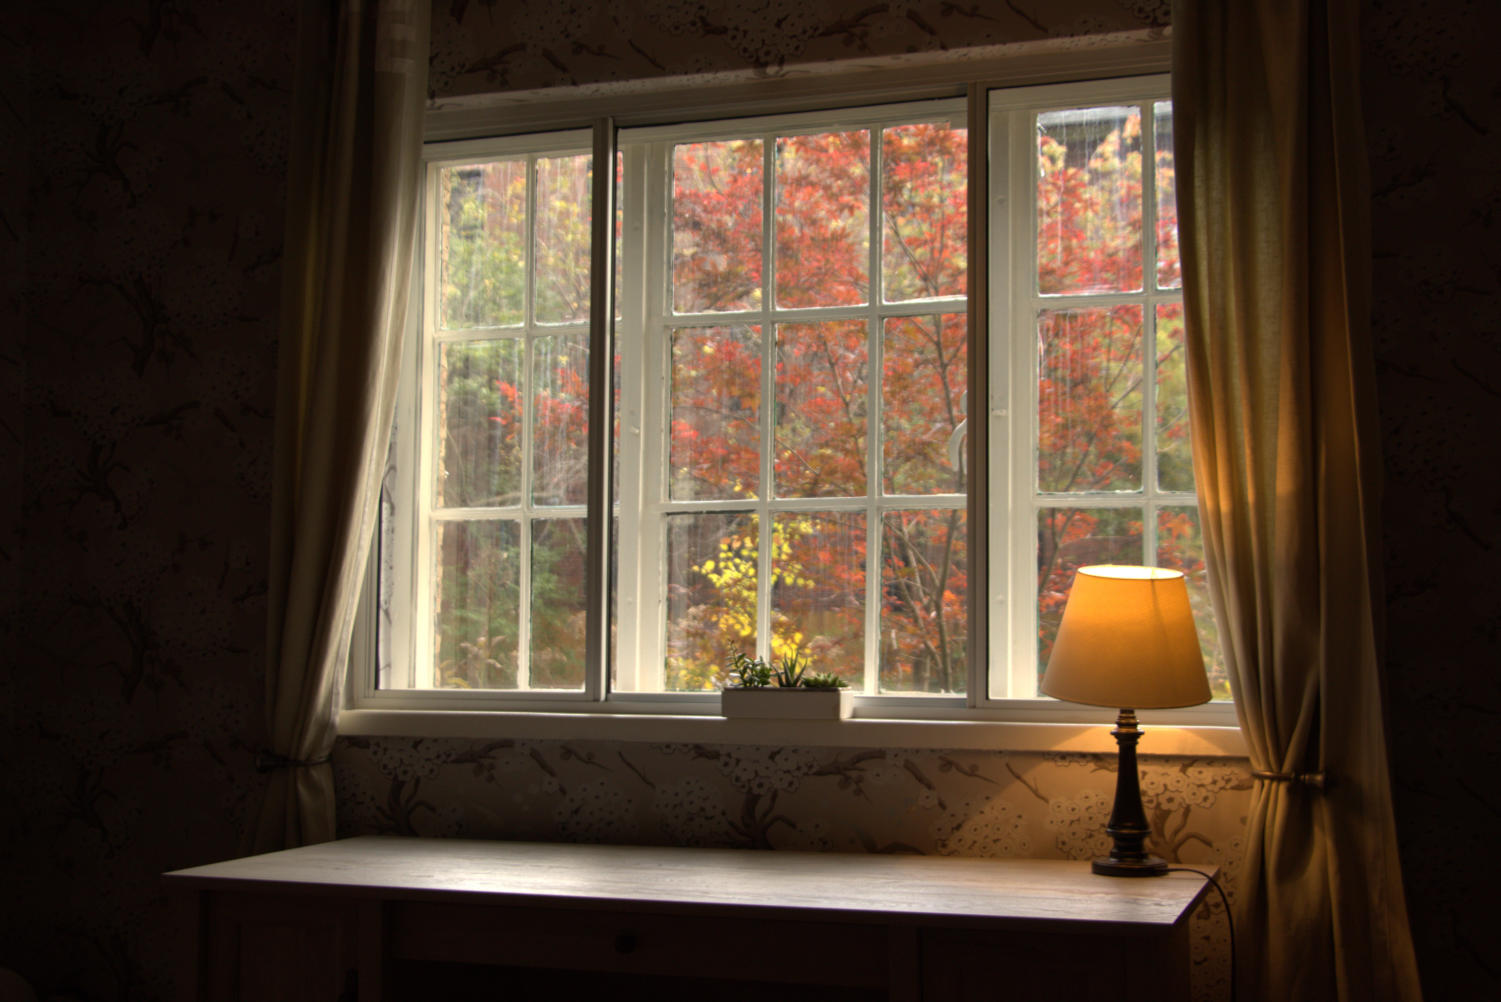 “Quarantined Fall”: A window view of a garden with changing leaves.